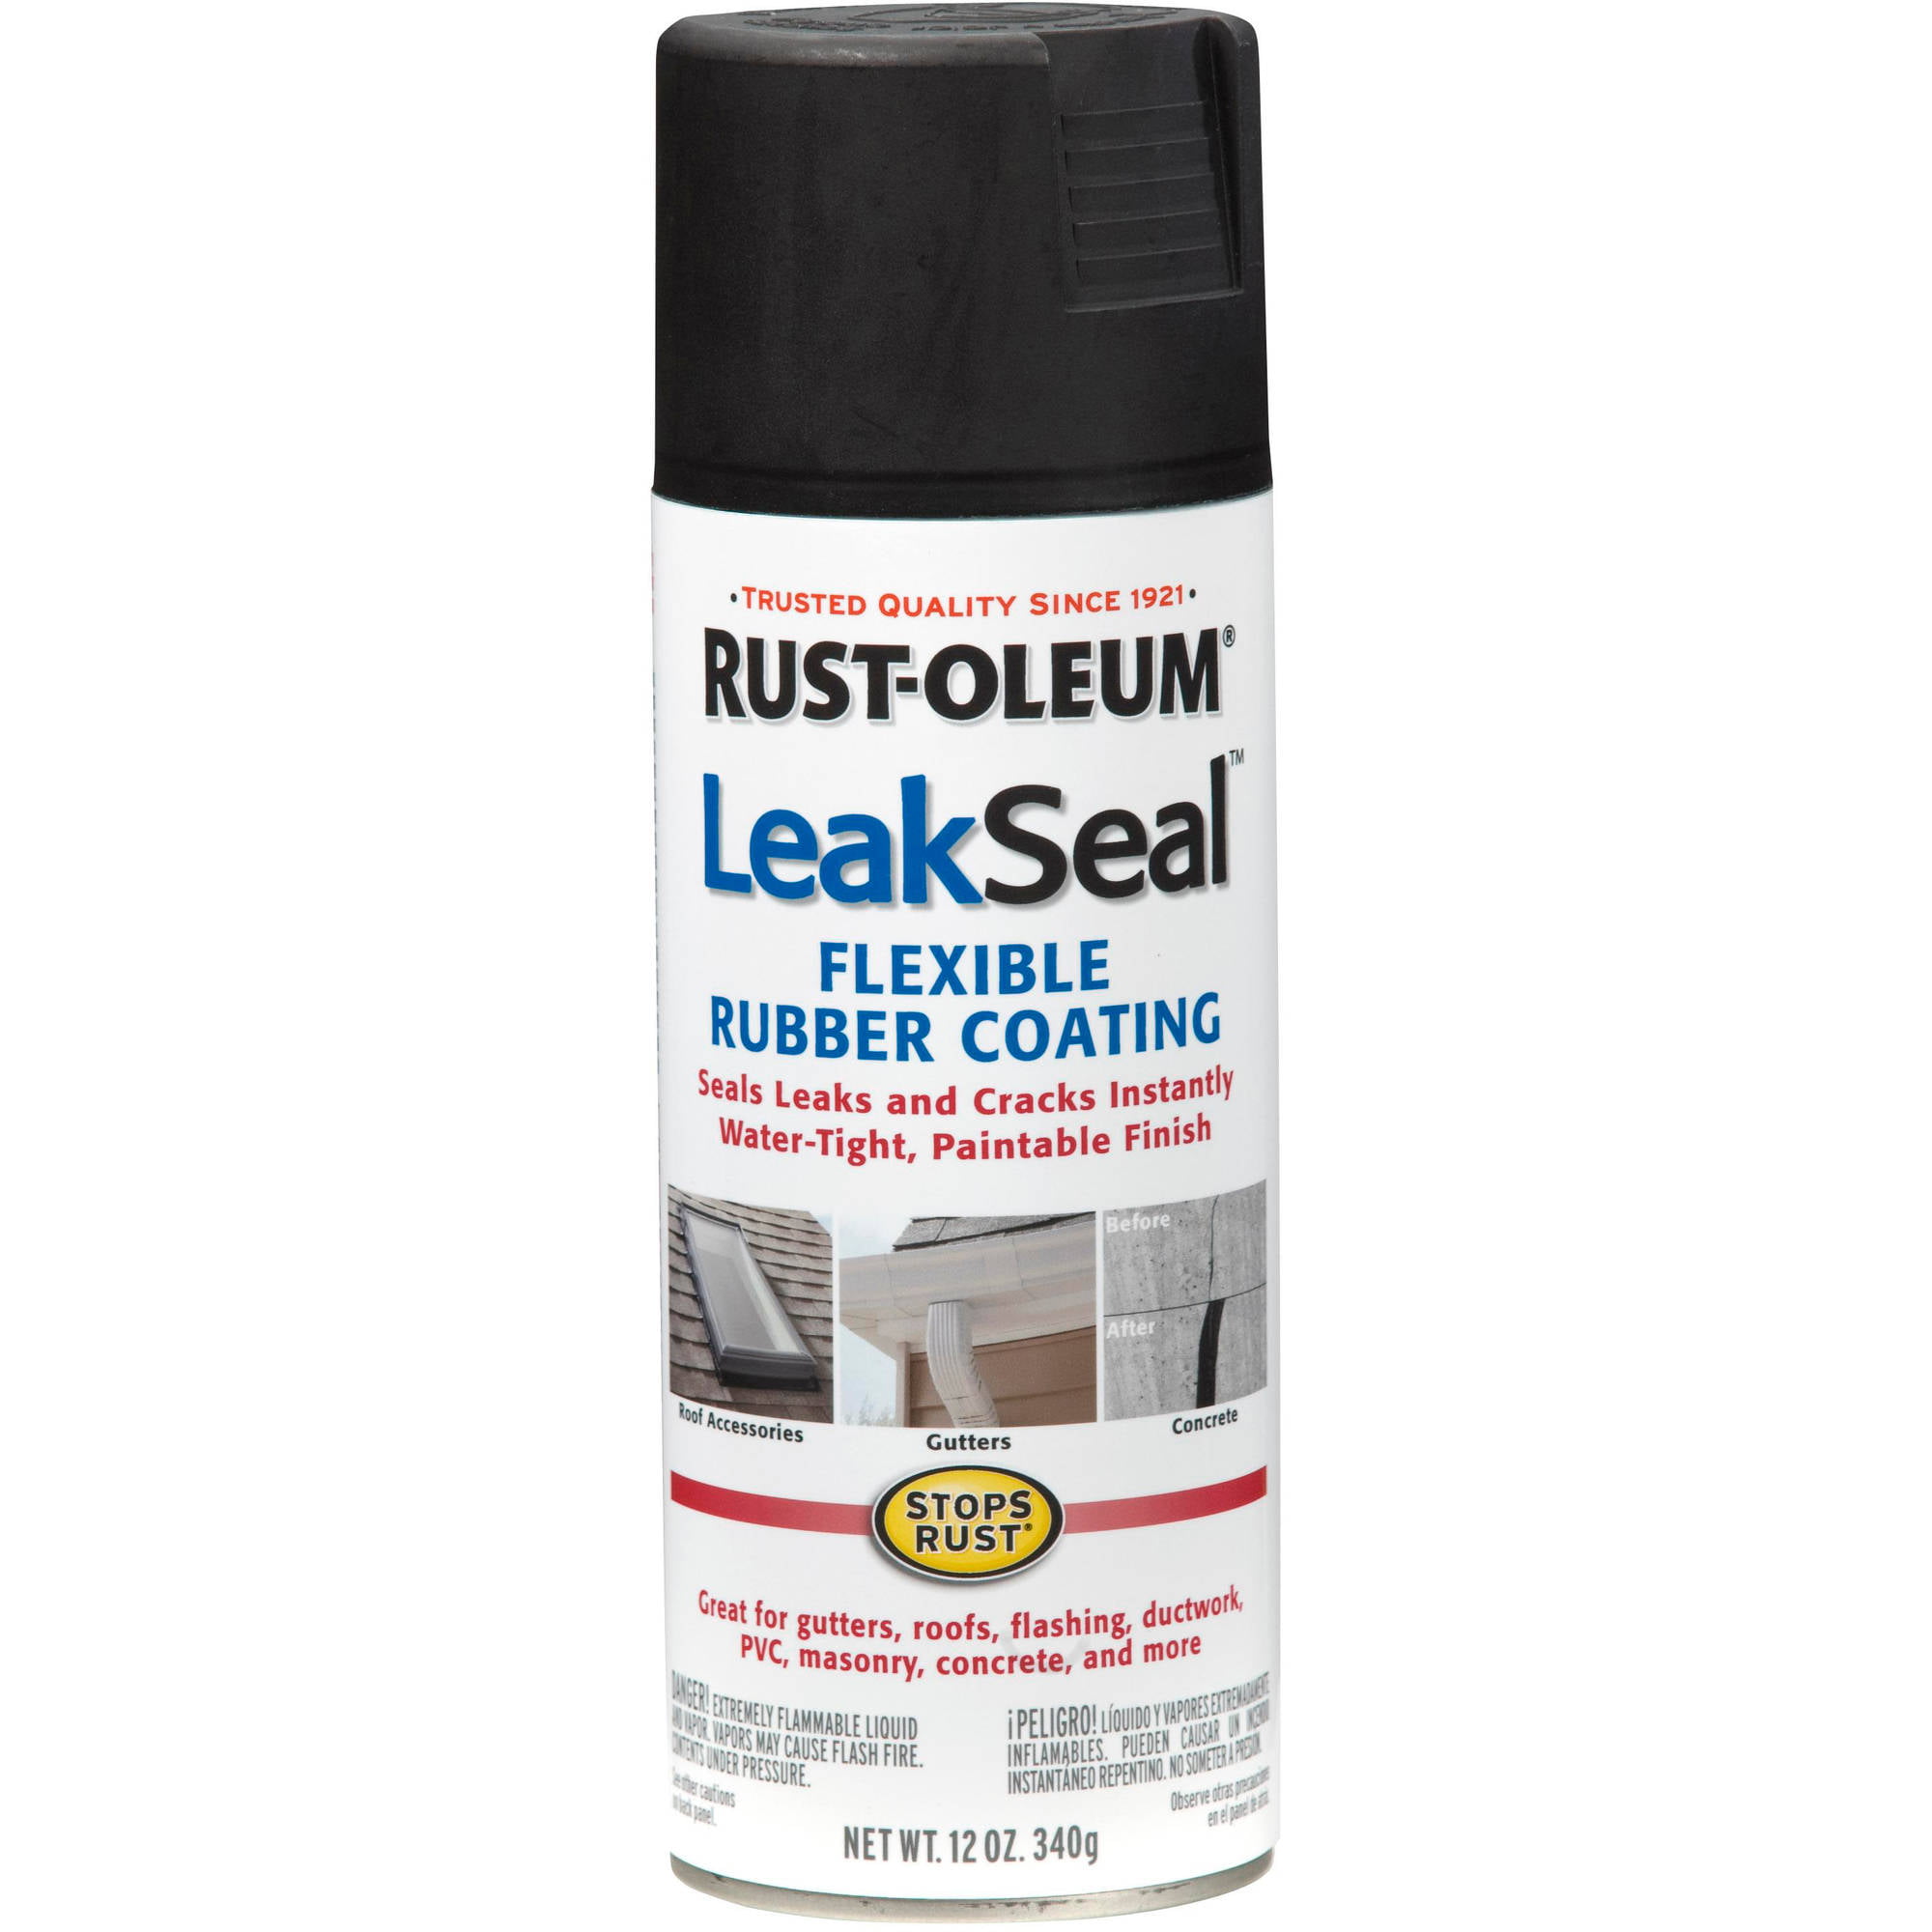 What are some common uses of rubberized paint?